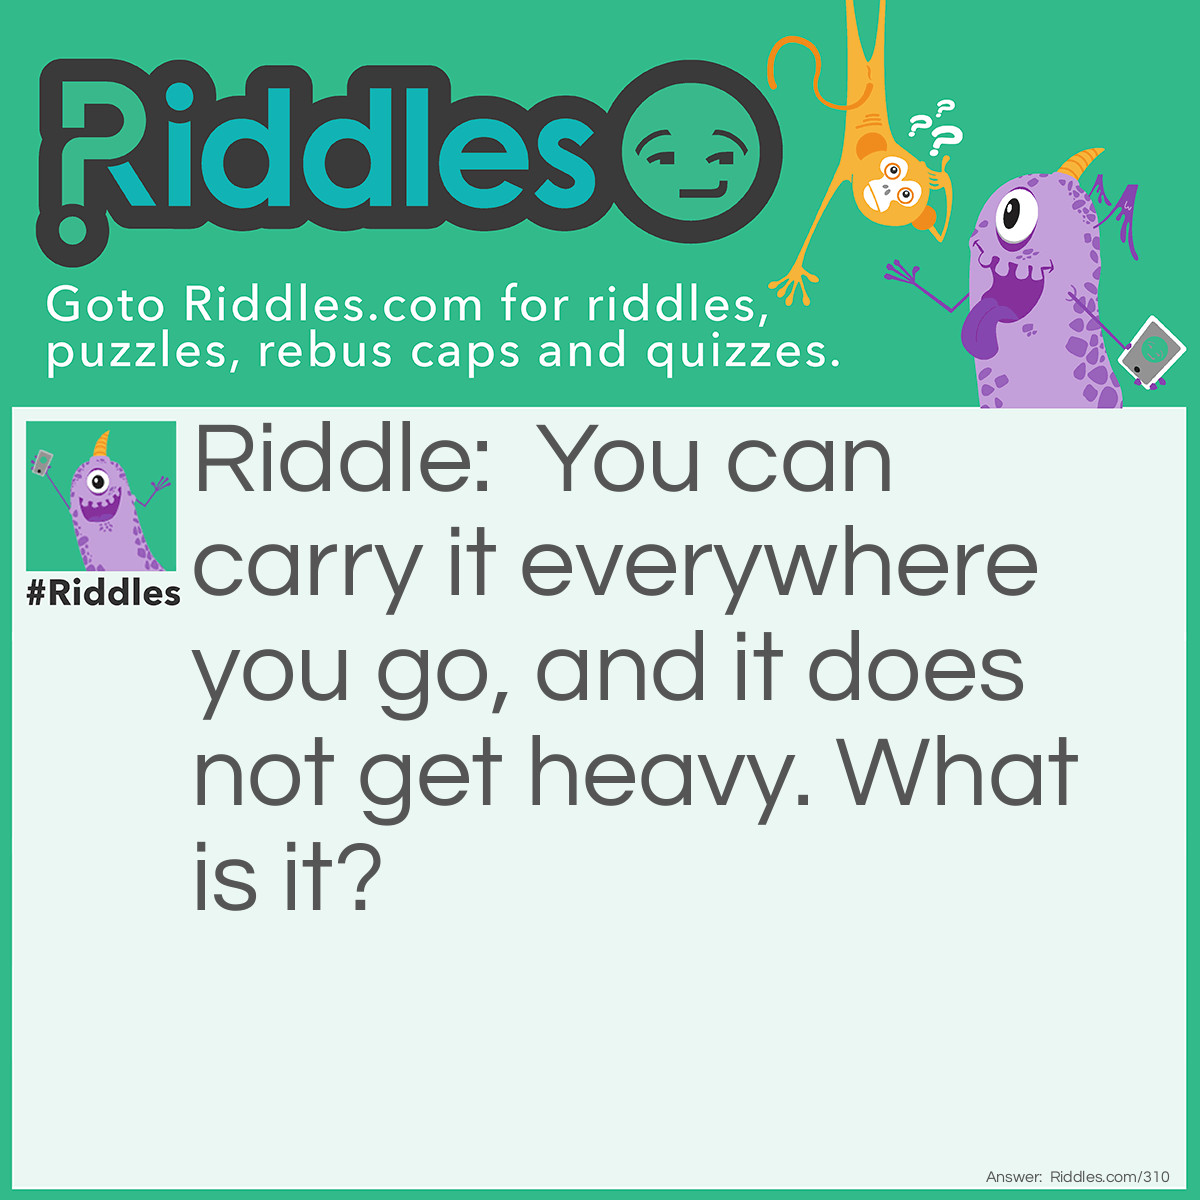 Riddle: You can carry it everywhere you go, and it does not get heavy. What is it? Answer: Your name.